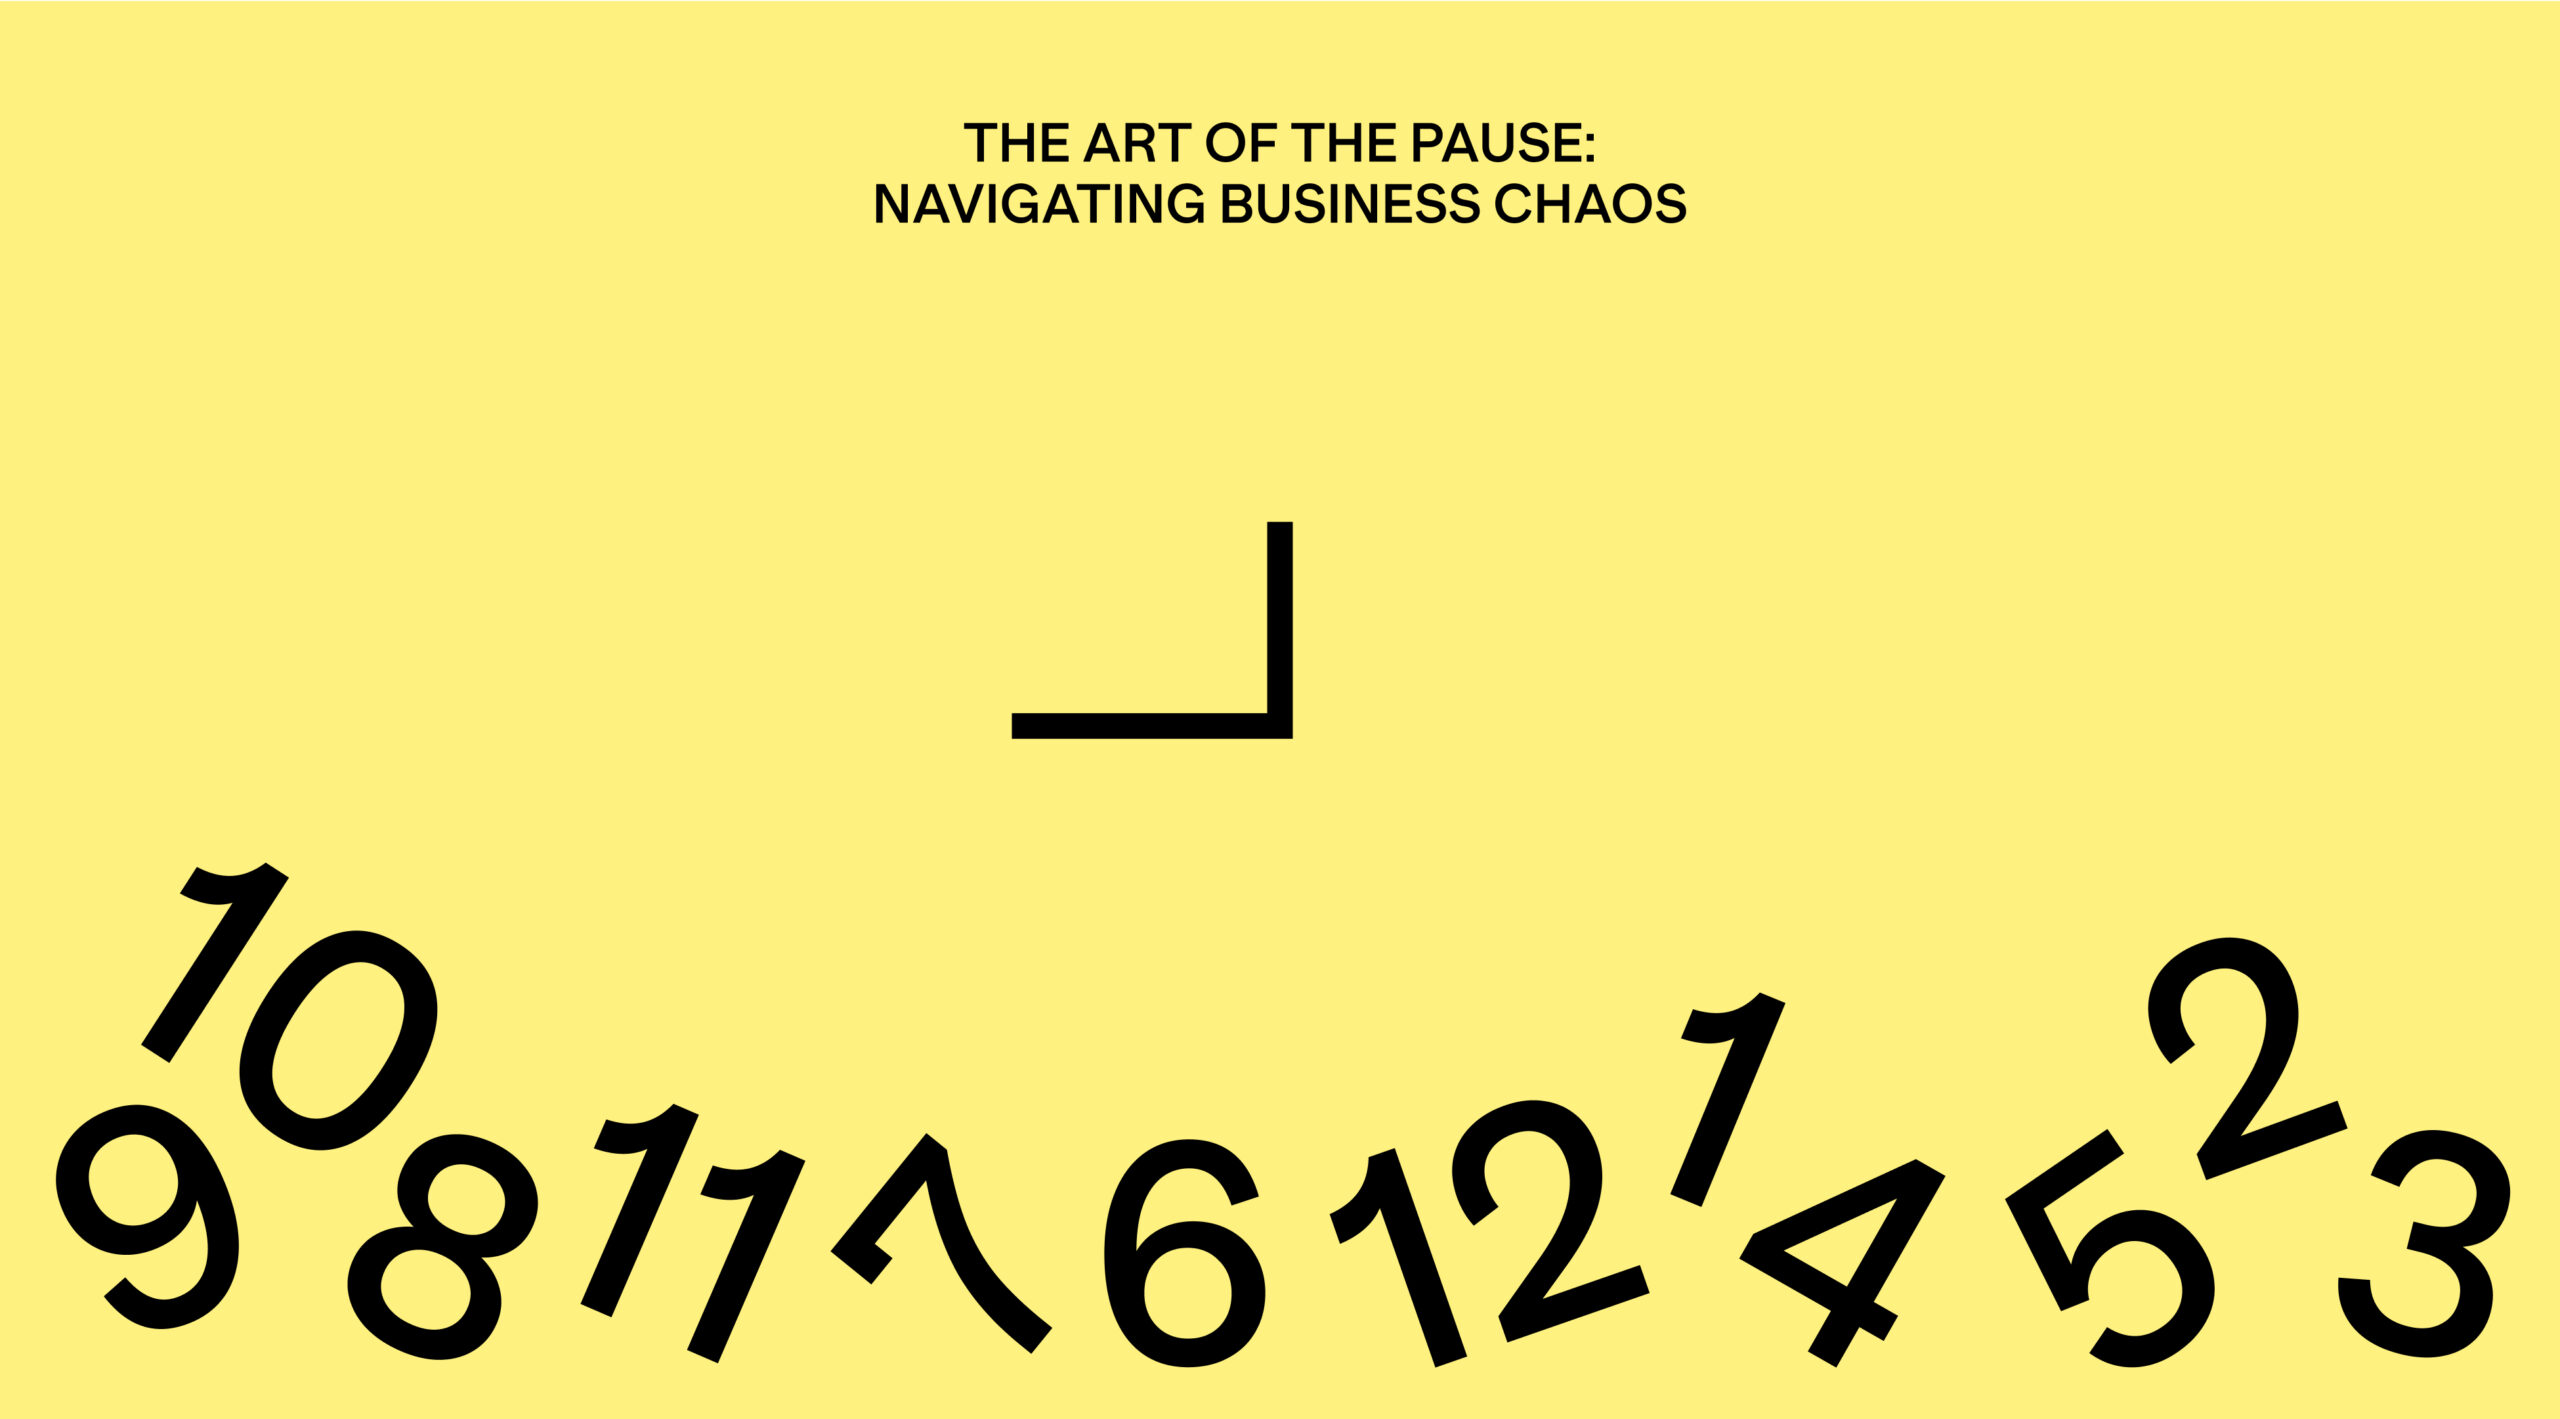 The Art of the Pause: Navigating Business Chaos